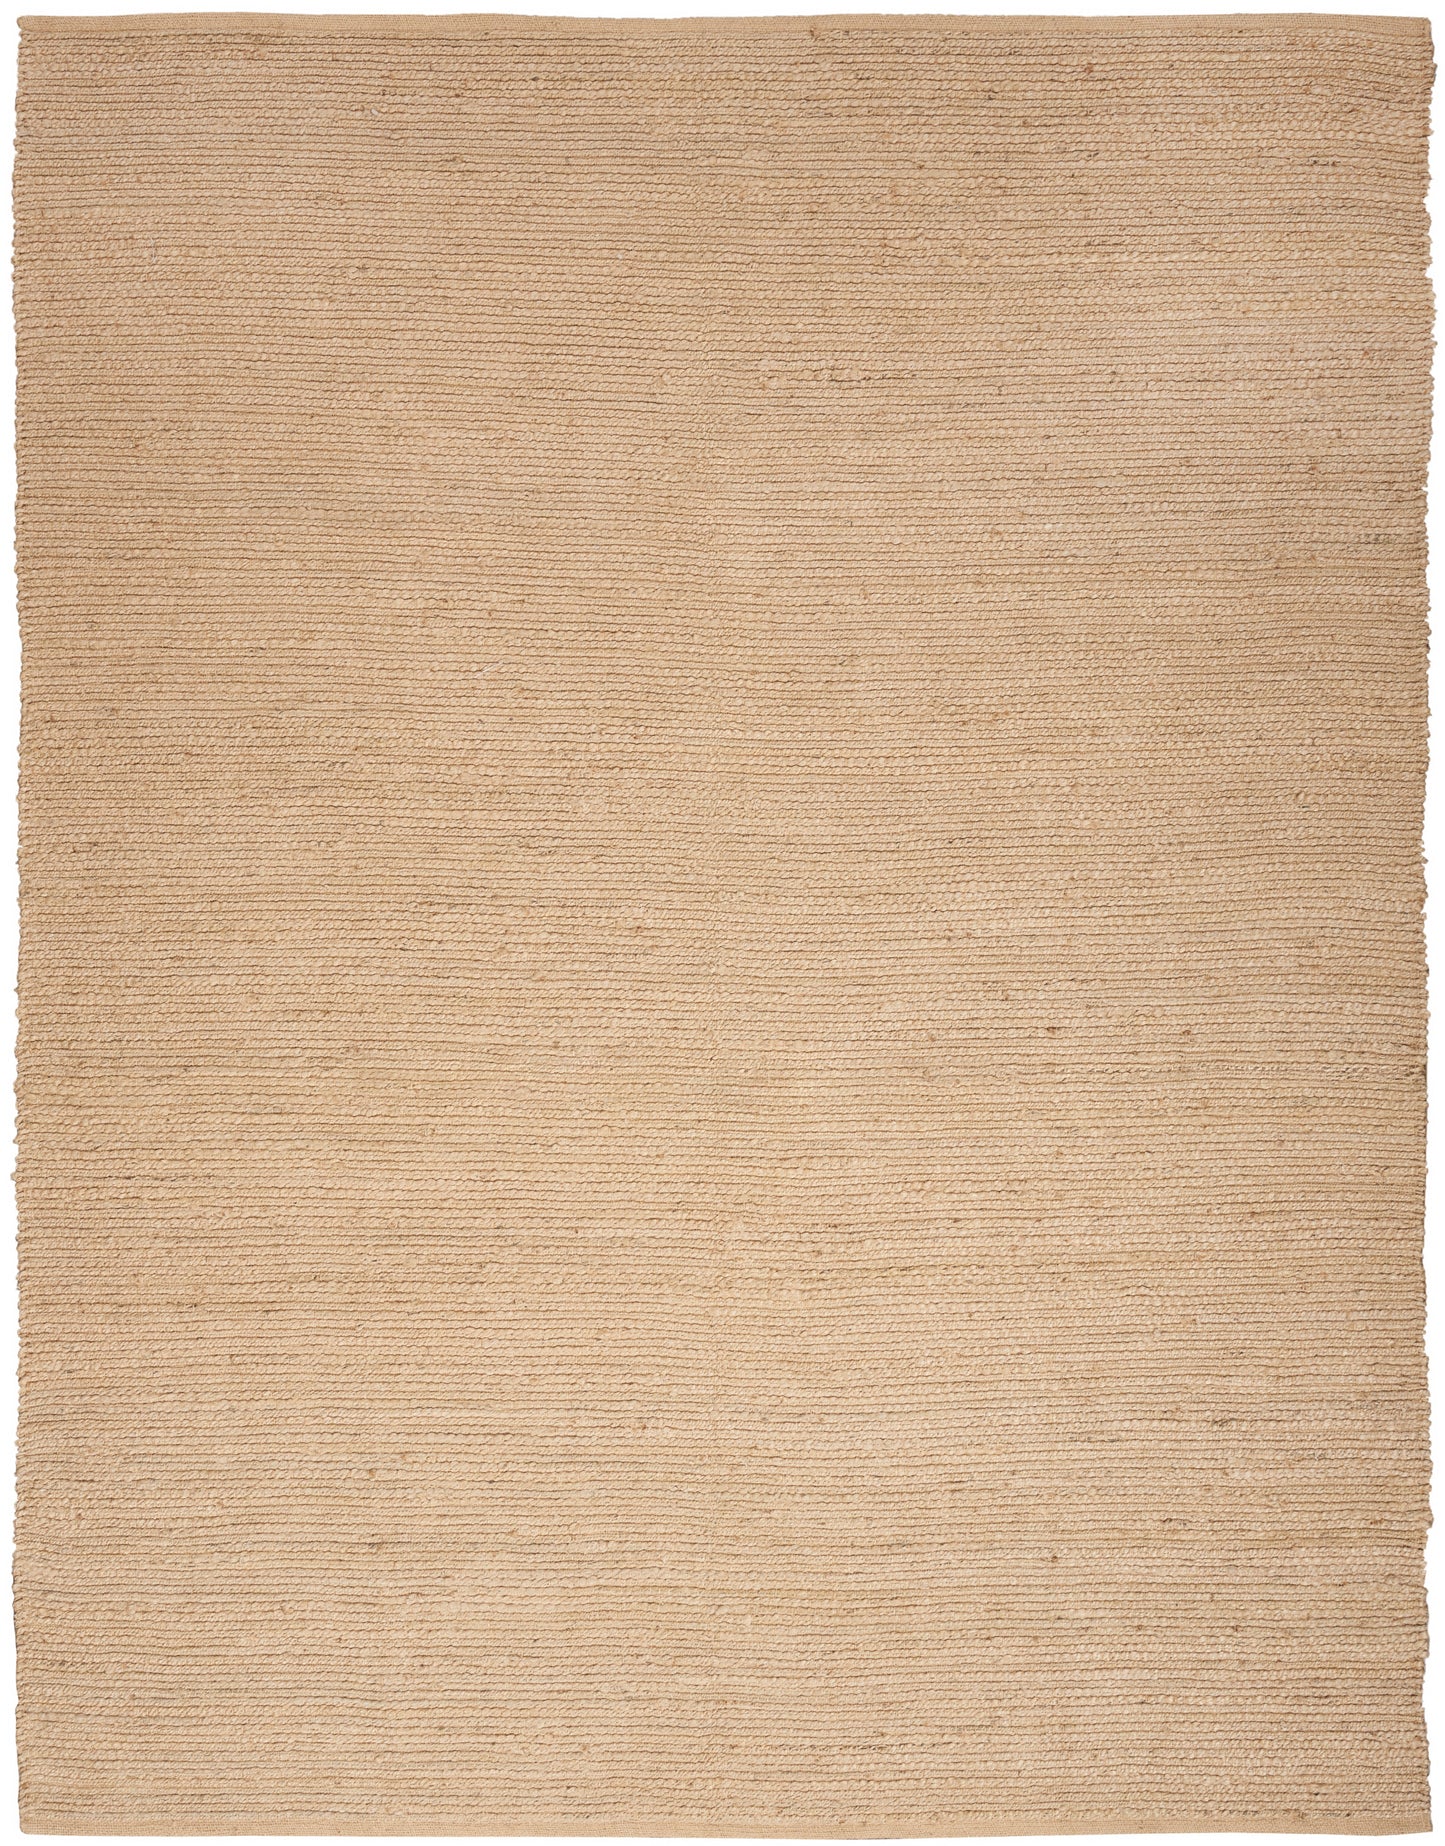 Nourison Home Natural Jute NJT01 Bleached  Contemporary Woven Rug